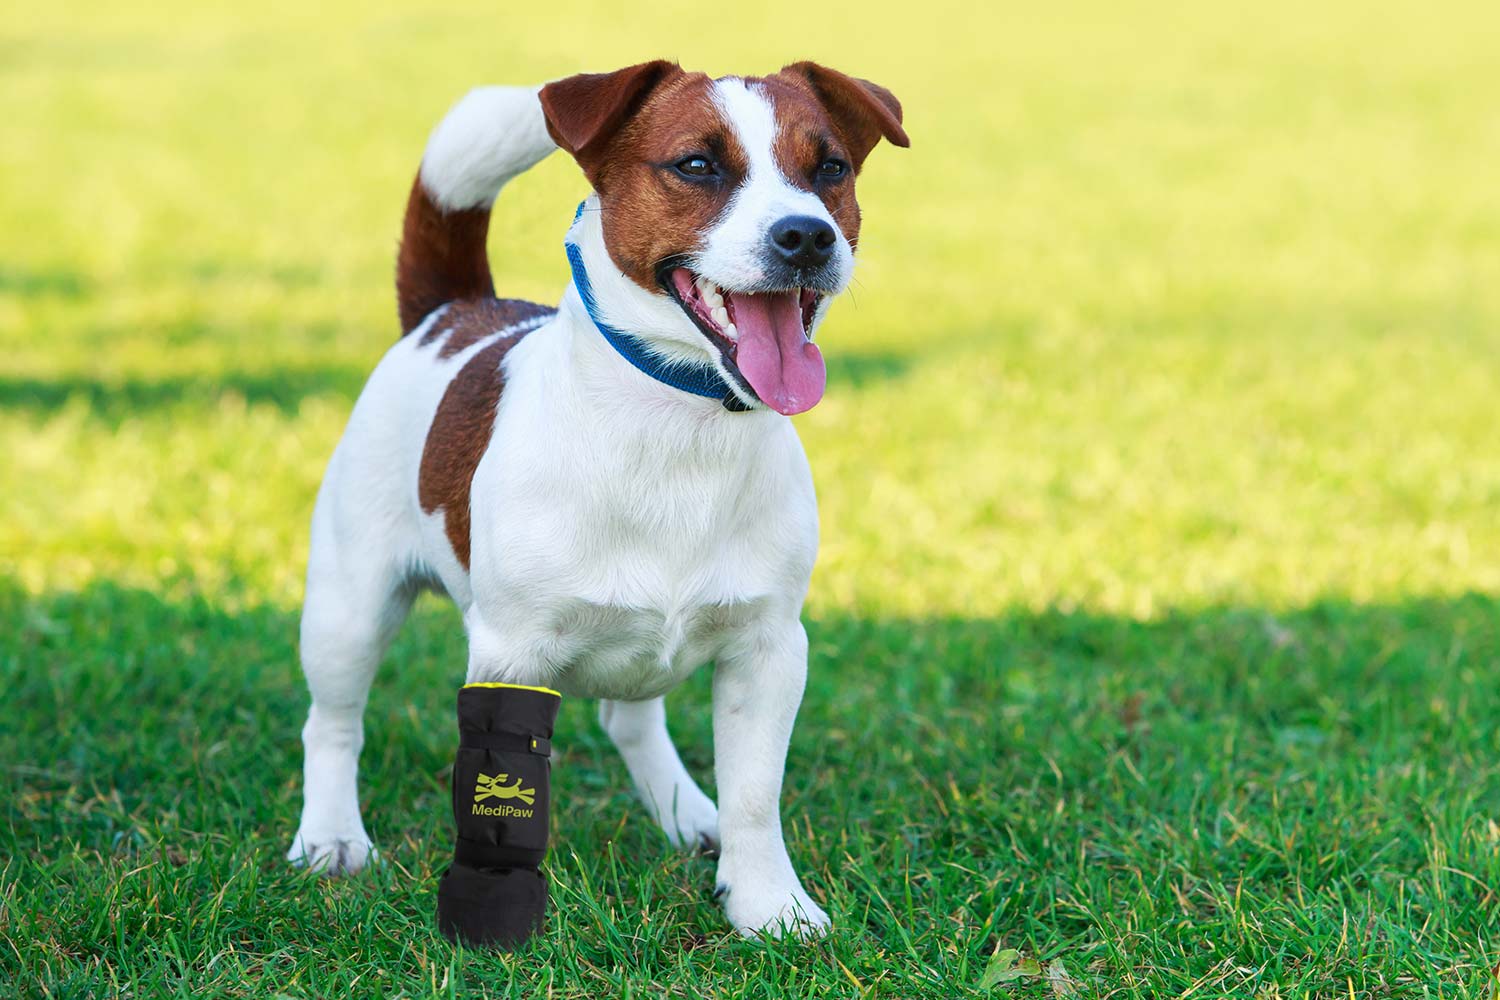 A dog wearing Your Whole Dog's MediPaw: Soft Bandage (Basic) Boot in the grass.